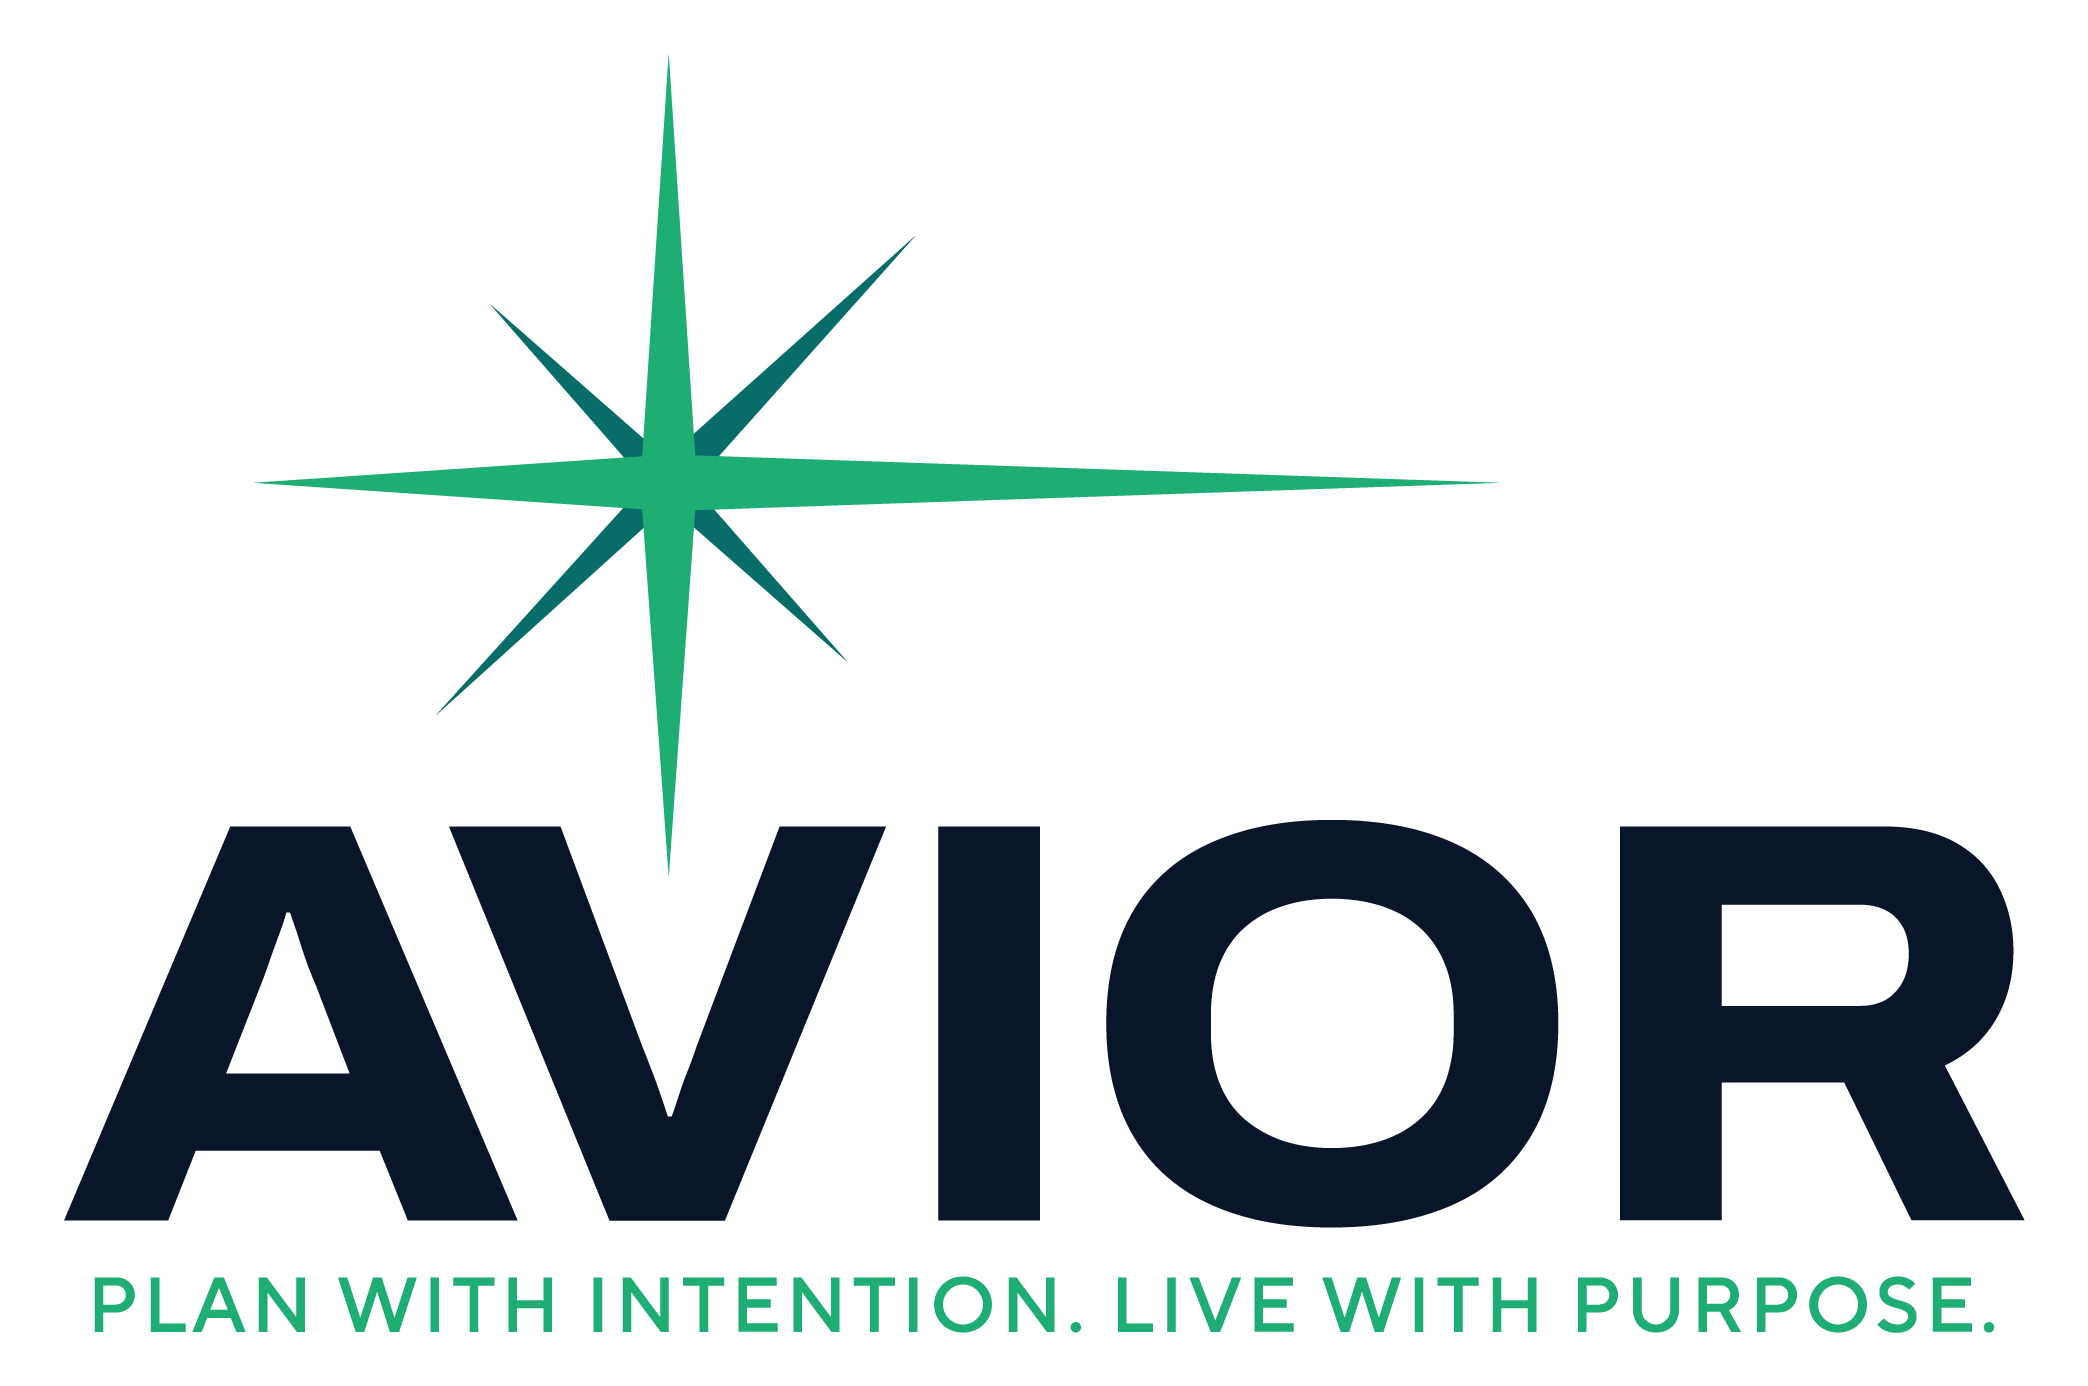 Avior - Plan With Intention. Live With Purpose.